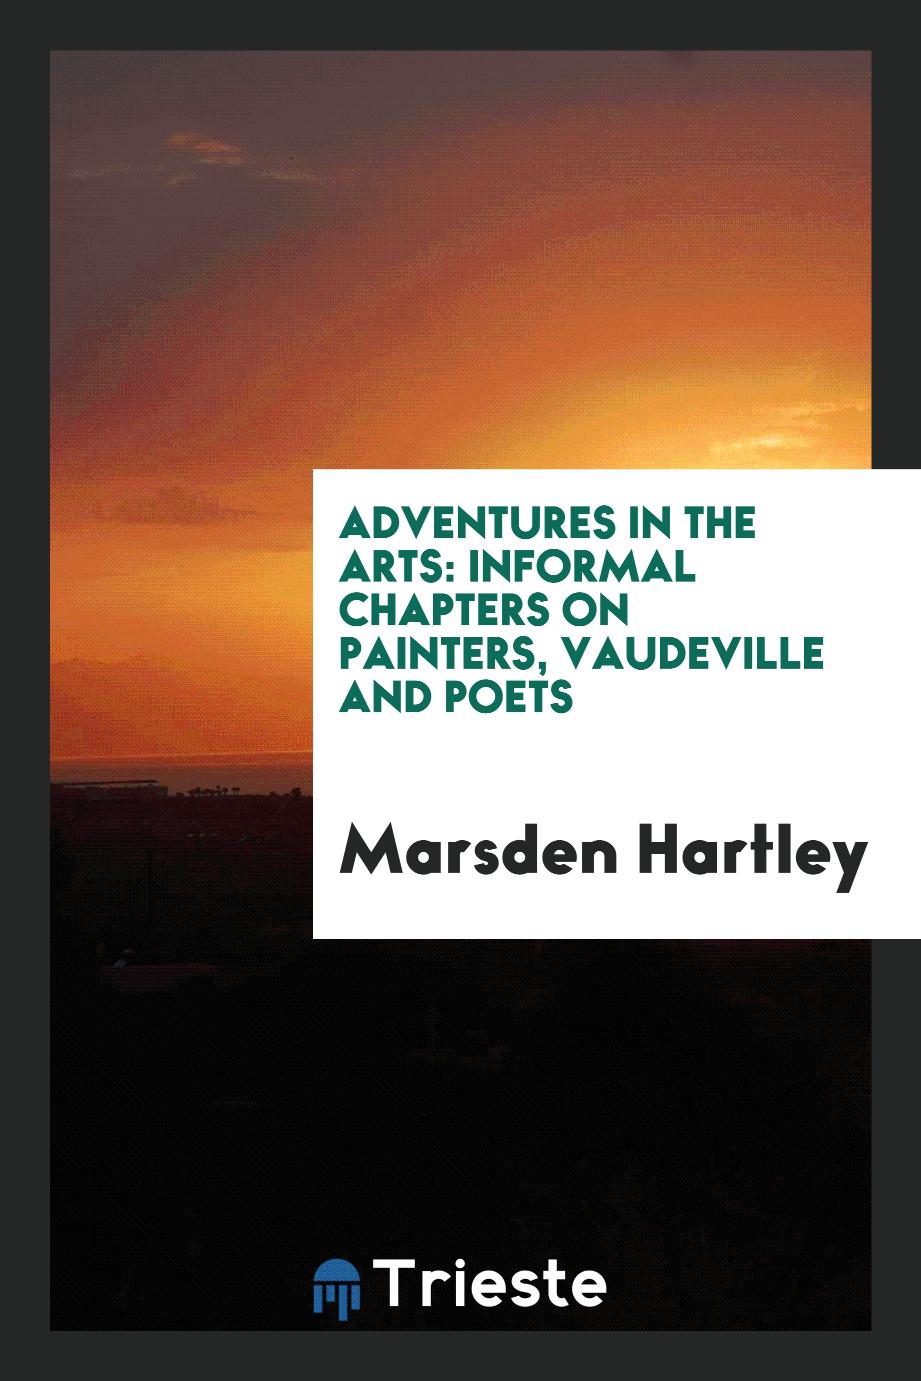 Adventures in the arts: informal chapters on painters, vaudeville and poets